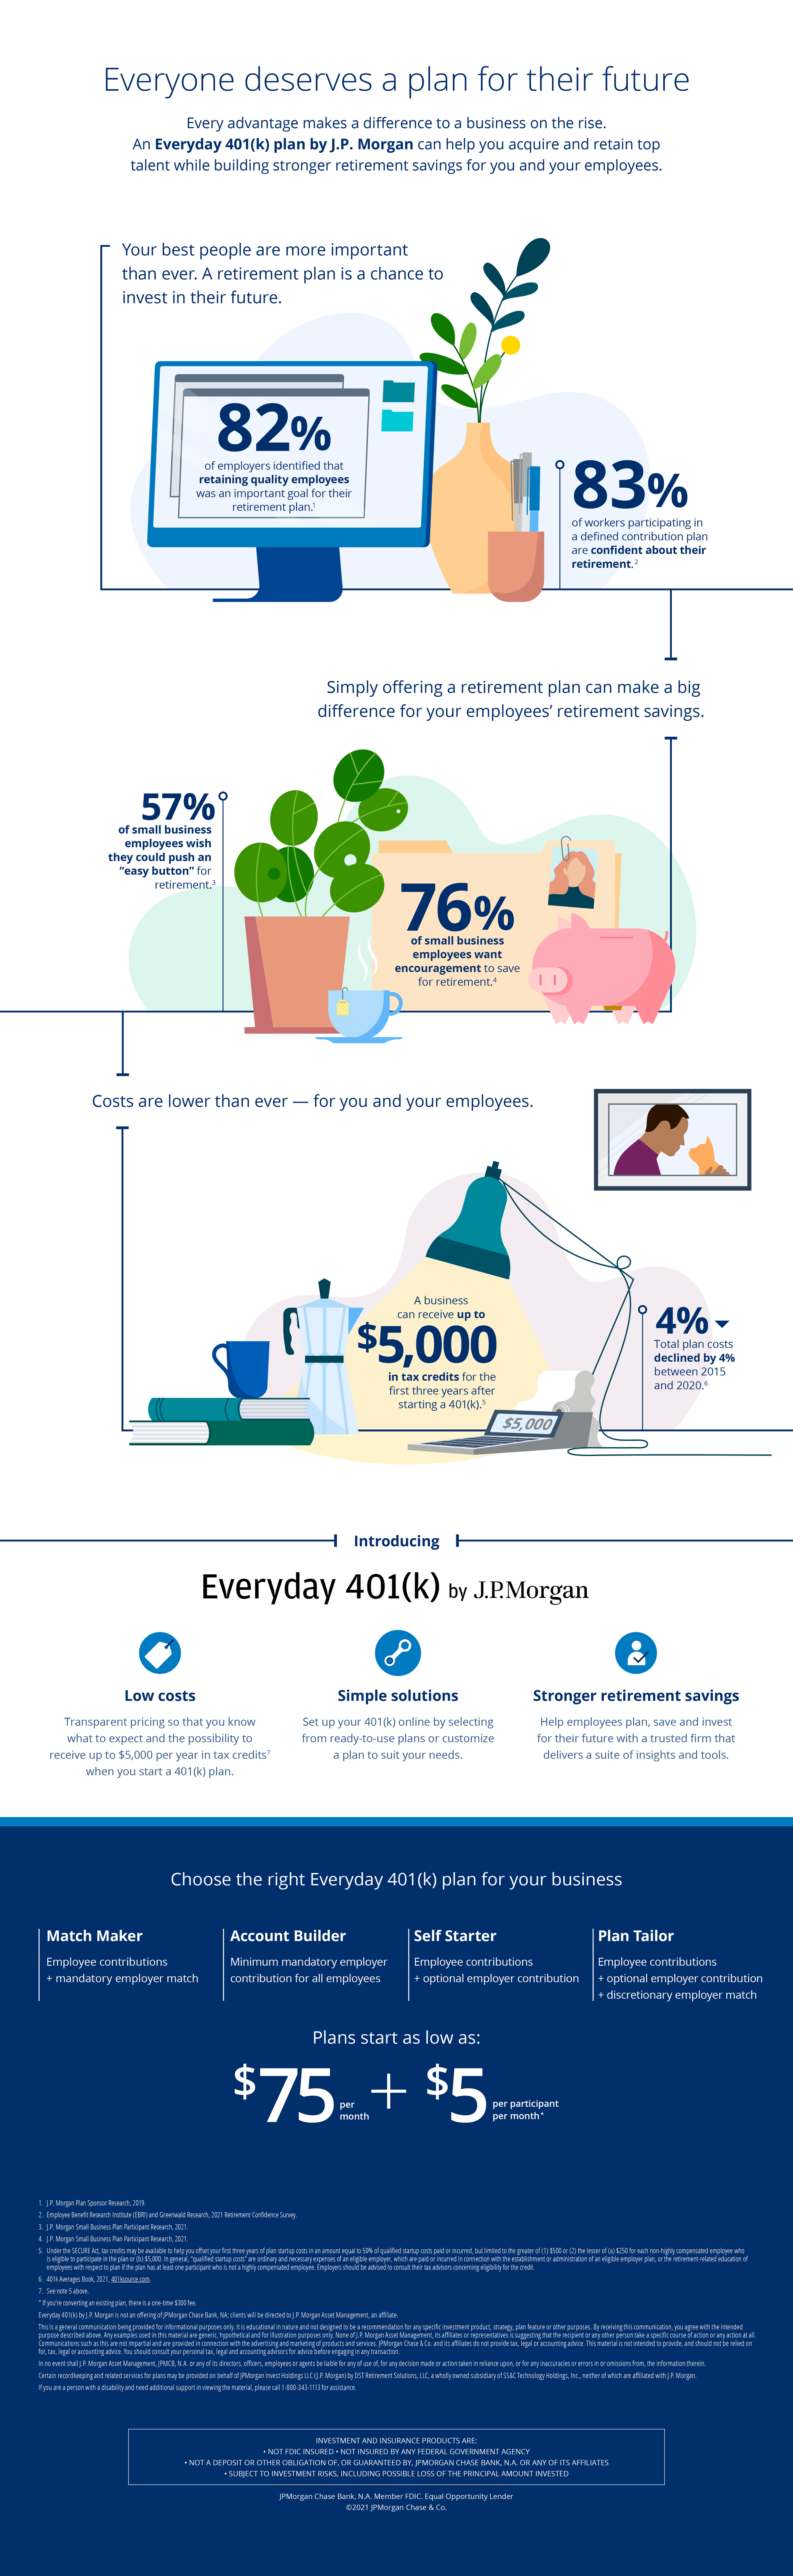 Everyday 401(k), infographic on building stronger retirement savings for you and your employees. 